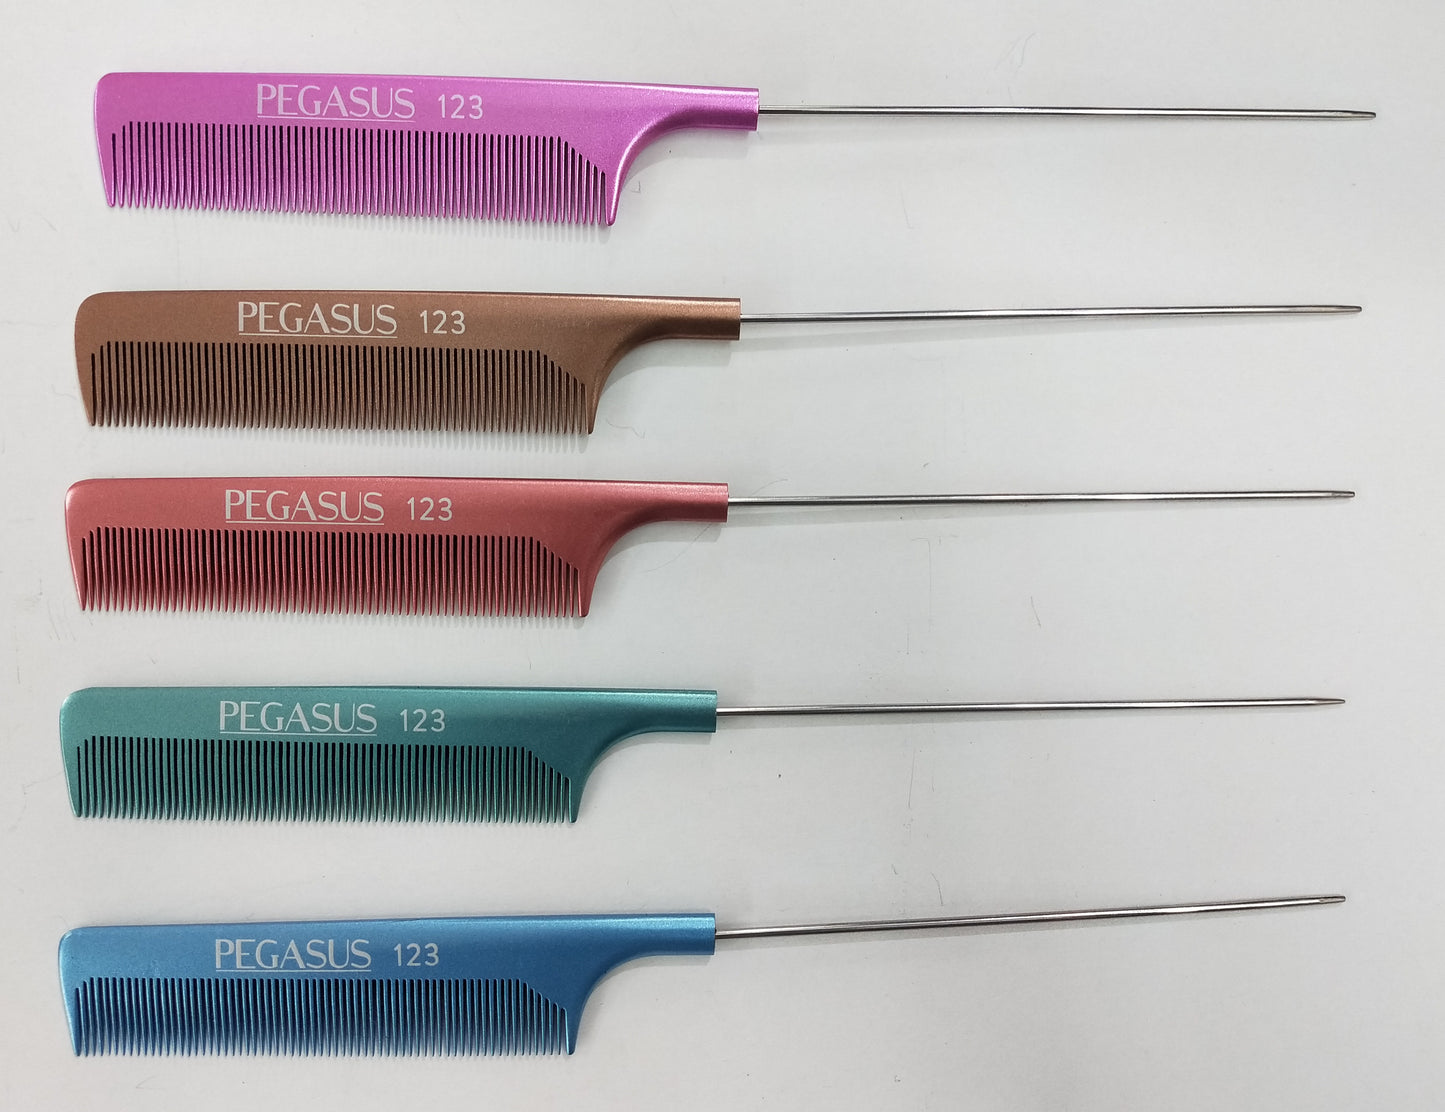 Pegasus MICOLOR 123, 9.75in Hard Rubber Fine Tooth Pintail Comb, Seamless, Anti Static, Heat and Chemically Resistant, Stainless Steel Pin, Great for Parting, Coloring Hair | Peines de goma dura - Copper